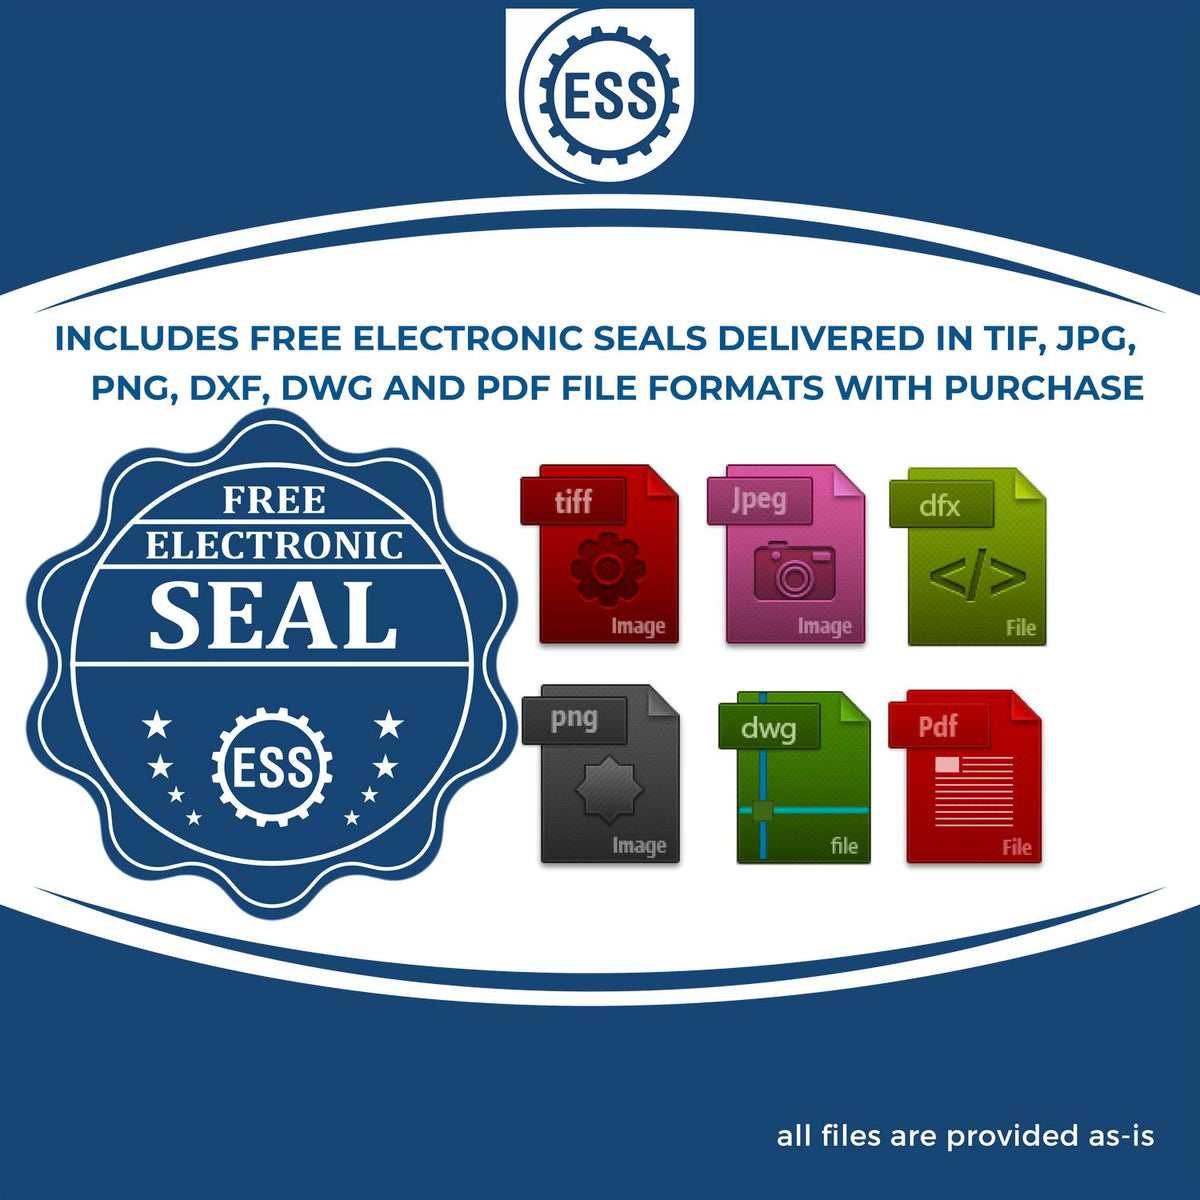 An infographic for the free electronic seal for the Premium MaxLight Pre-Inked Missouri Geology Stamp illustrating the different file type icons such as DXF, DWG, TIF, JPG and PNG.